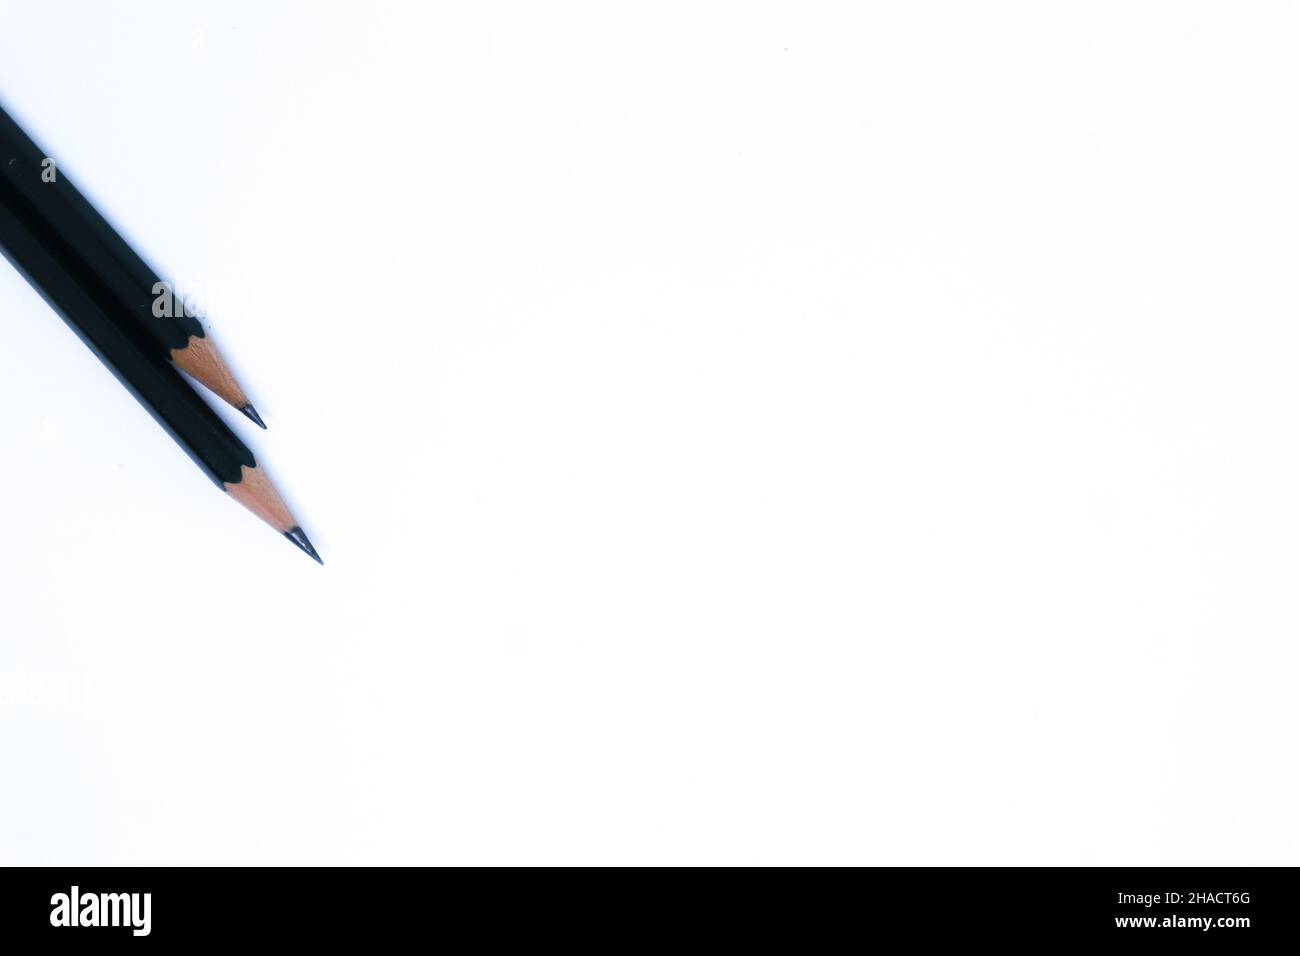 Two Pencils in The Corner of White Background with Flat Lay Shot, Landscape Mode and Minimalist Stock Photo